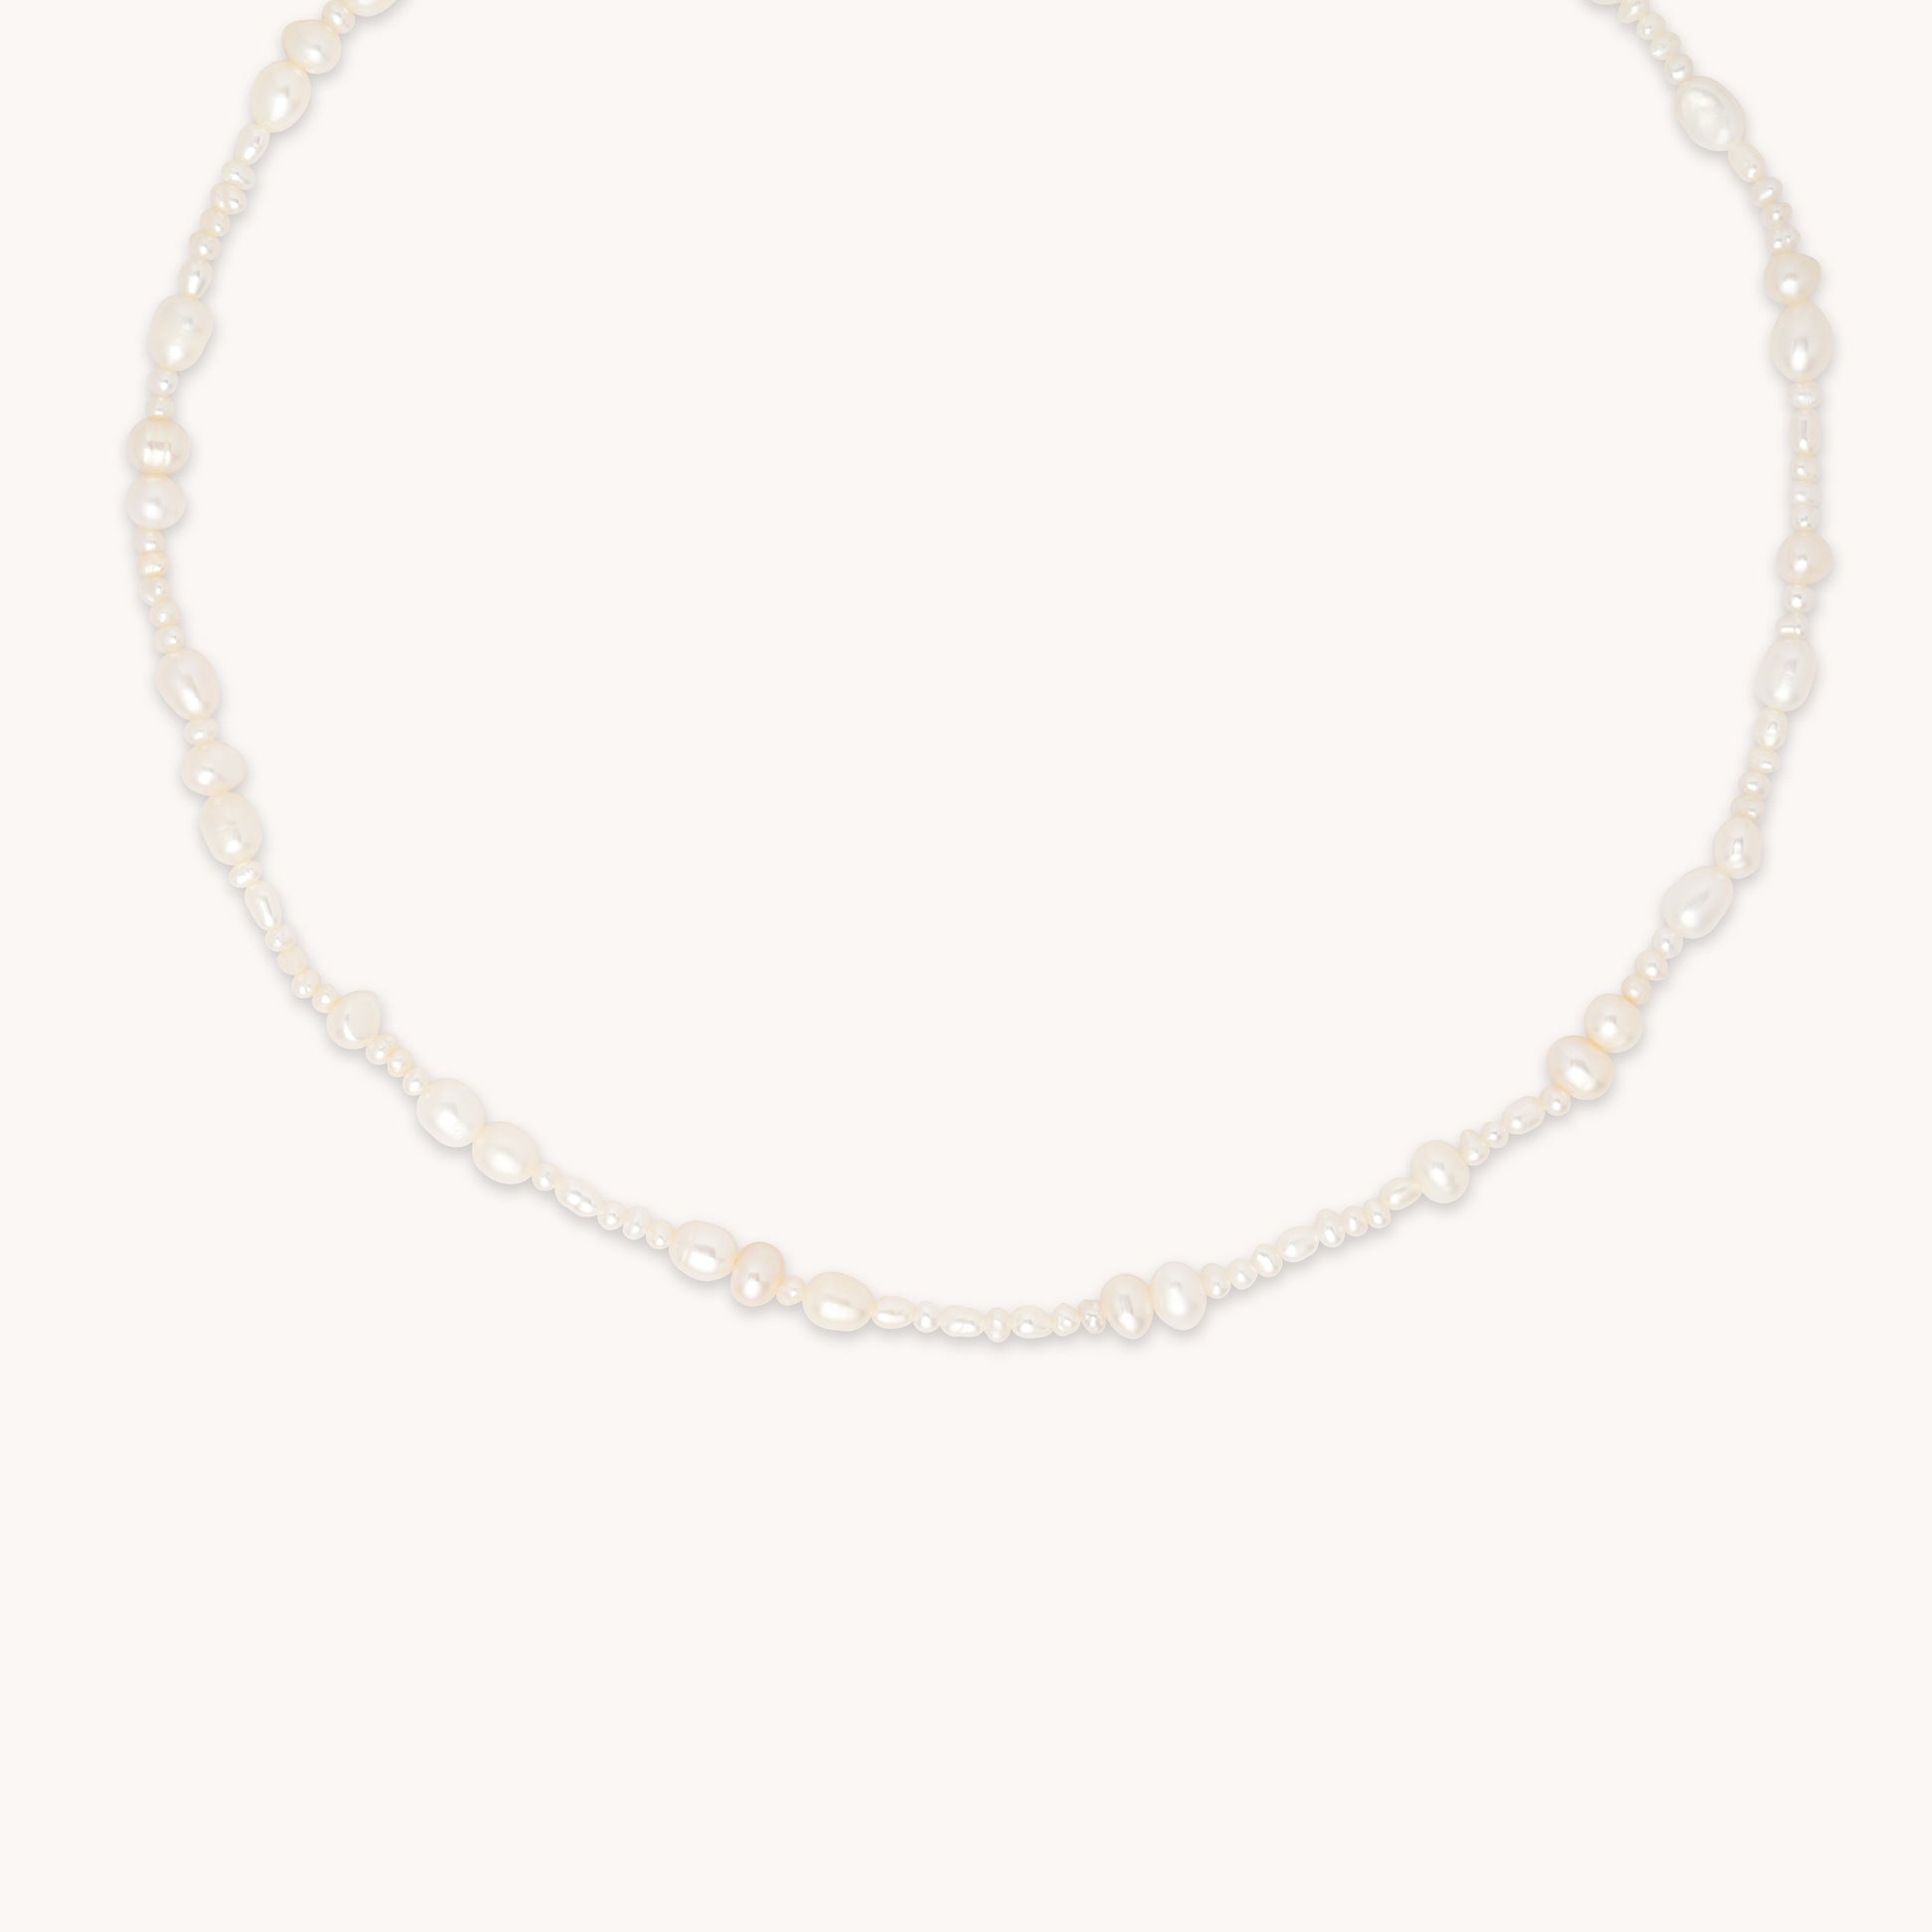 Serenity Gold Pearl Beaded Necklace | Astrid & Miyu Necklaces